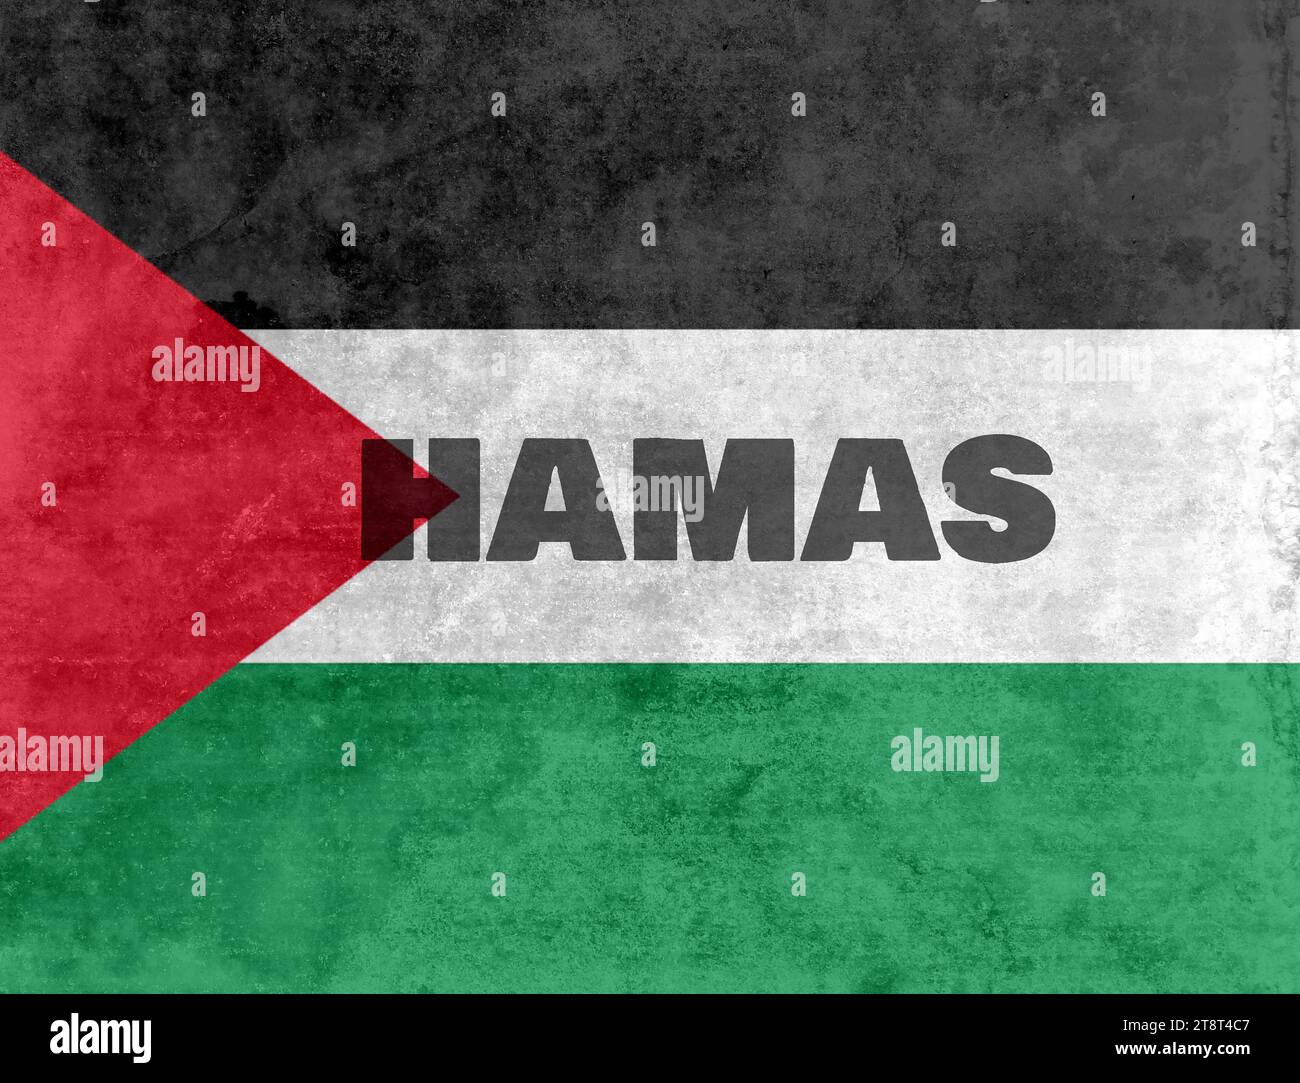 Damaged grunge flag of Palestine, Palestinian Territories with the text Hamas Stock Photo